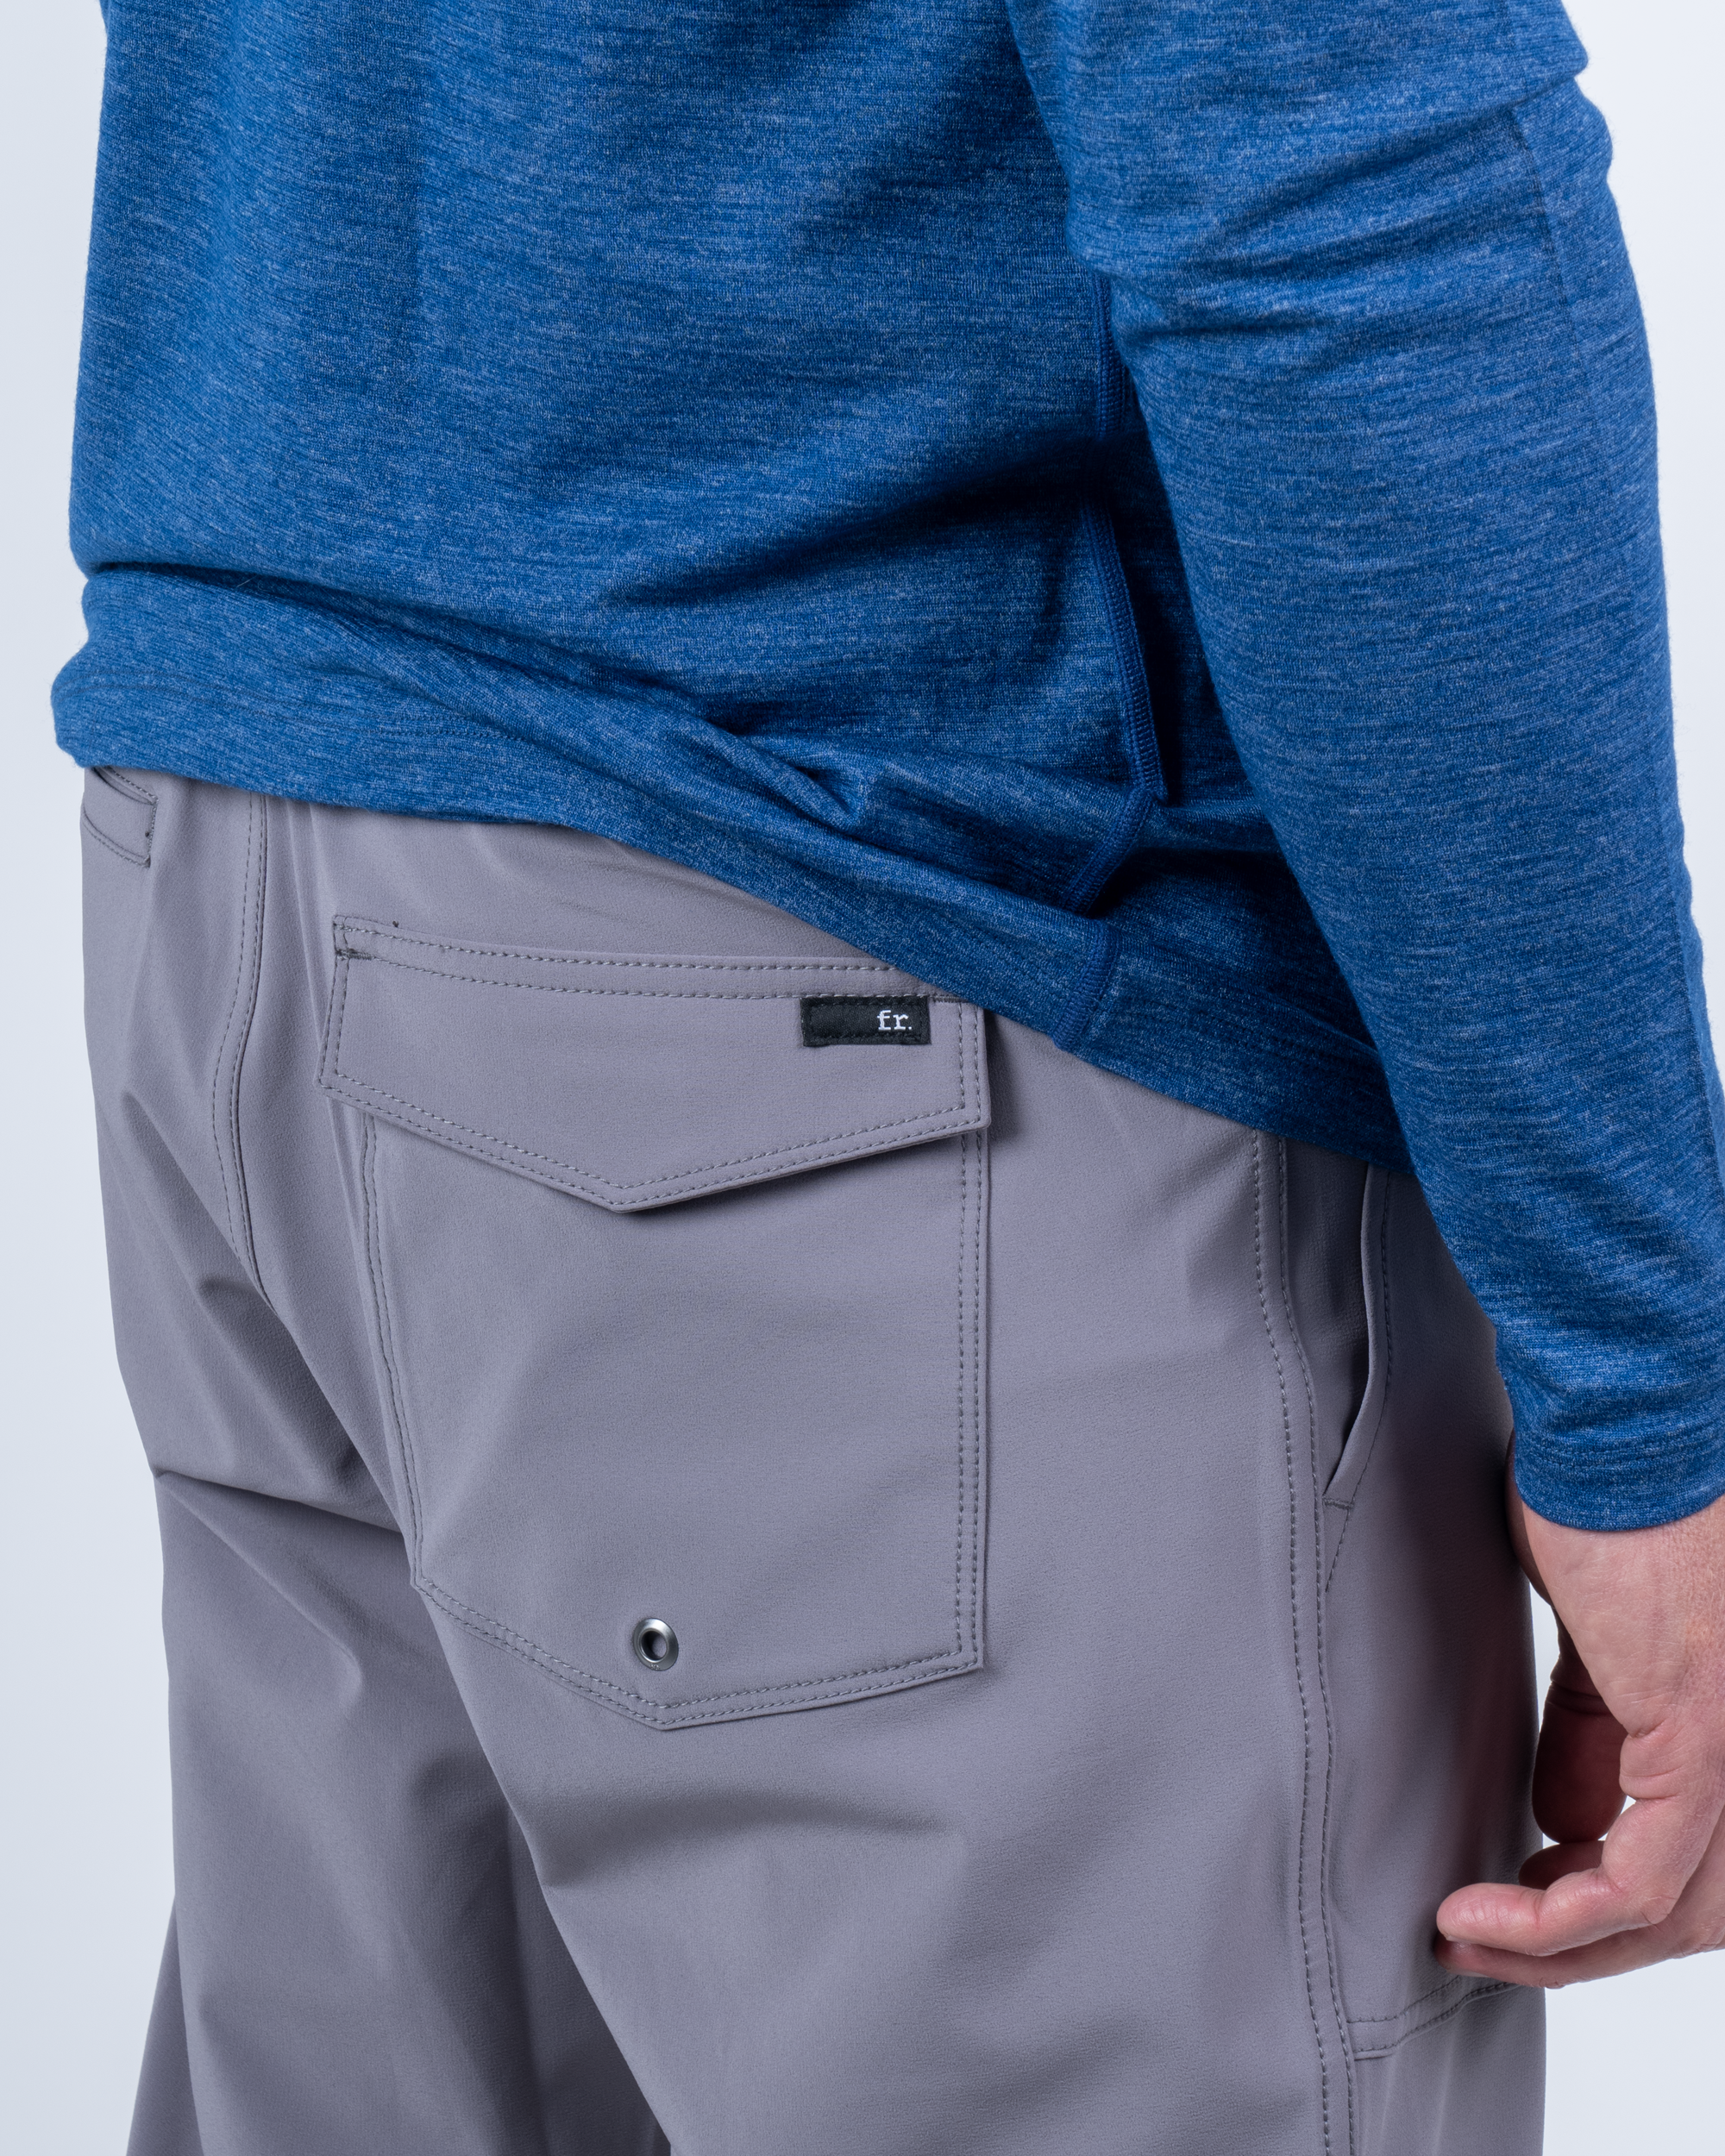 Foreign Rider Co Technical Fabric Grey Pull On Performance Pant Zip Back Pocket with Velcro Detail